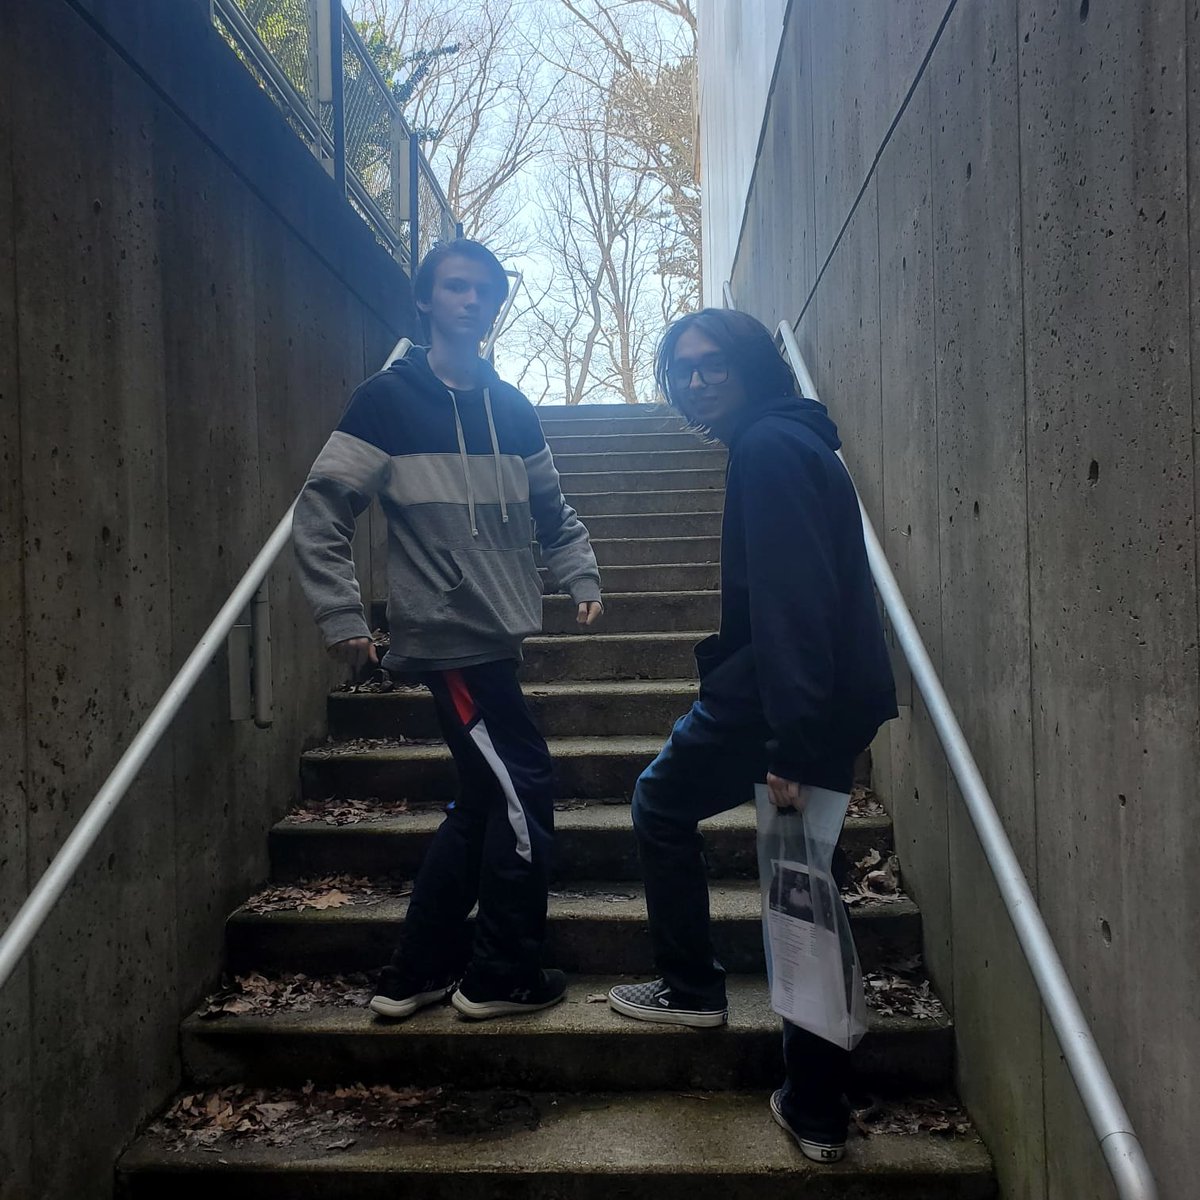 My oldest (right) visited #StocktonU  today kicking off his college search. His bro (left) came along and dad got a picture in the stairwell outside the ET lobby where we had our very first conversation 22 years ago.  Excited at the prospect of a 2nd gen at SU. #DiscoverStockton